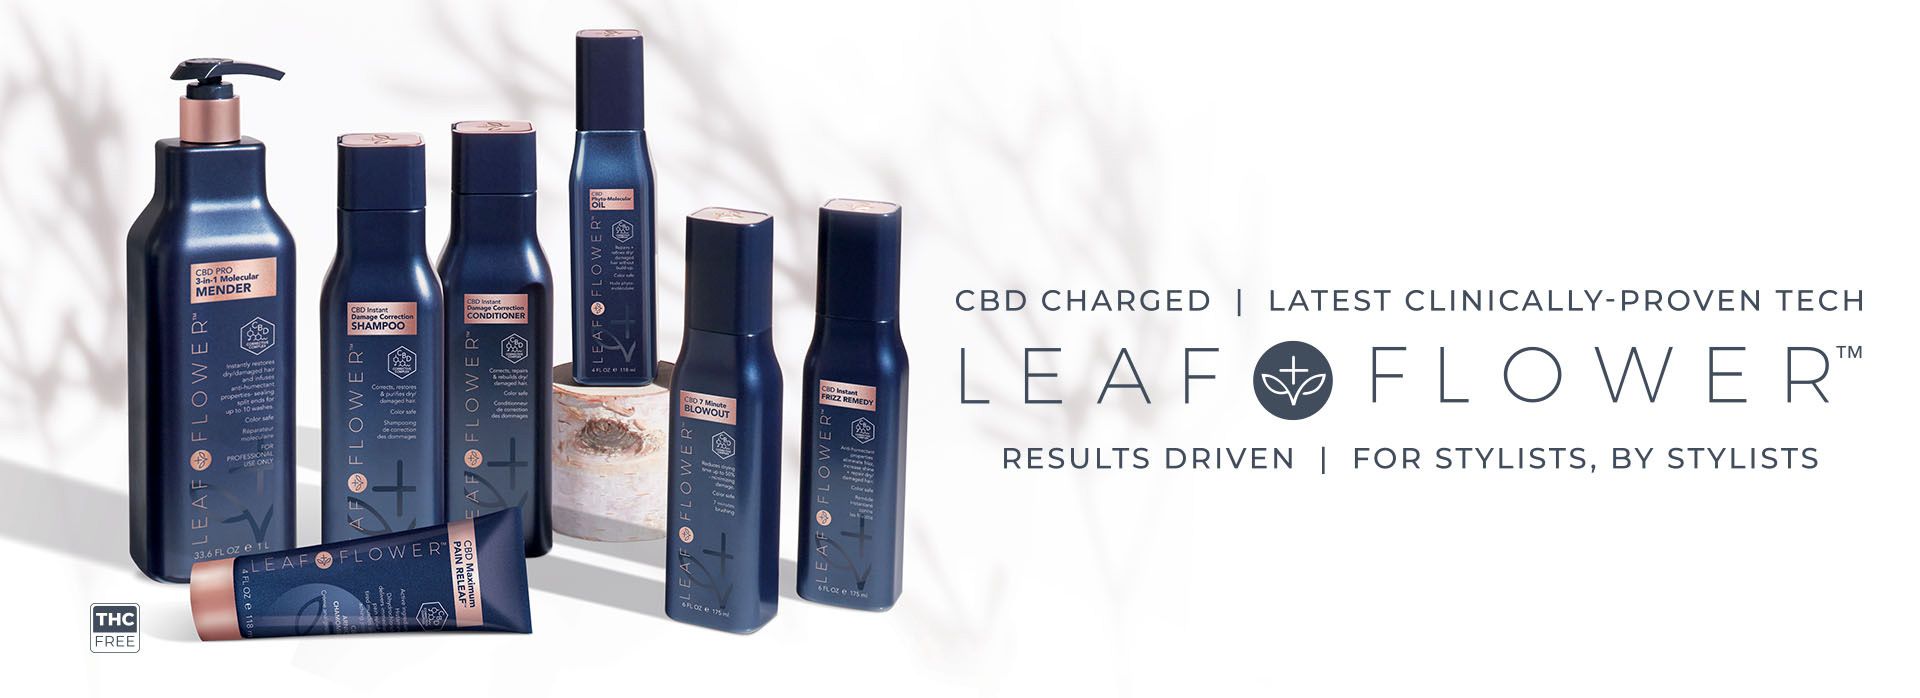 CBD Charged | Latest clinically-proven tech Leaf & Flower Results driven | For stylist, by stylist